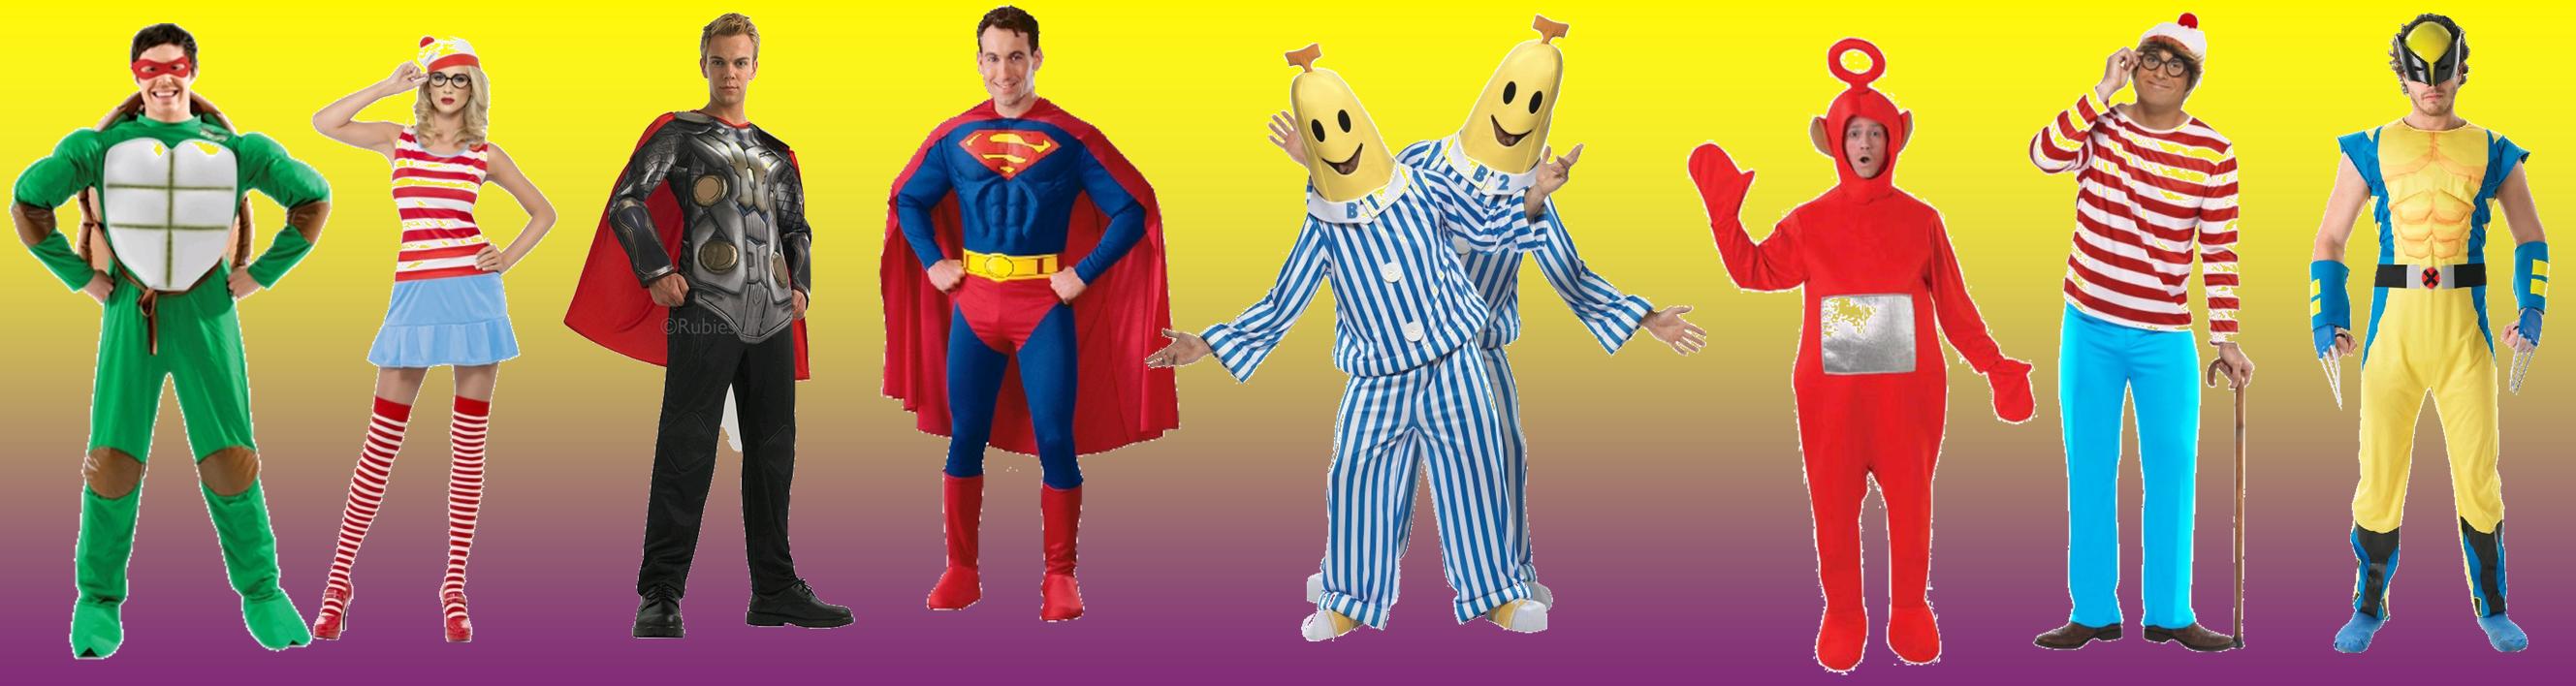 Cartoon Costume Ideas - Hire or Buy - Acting the Part